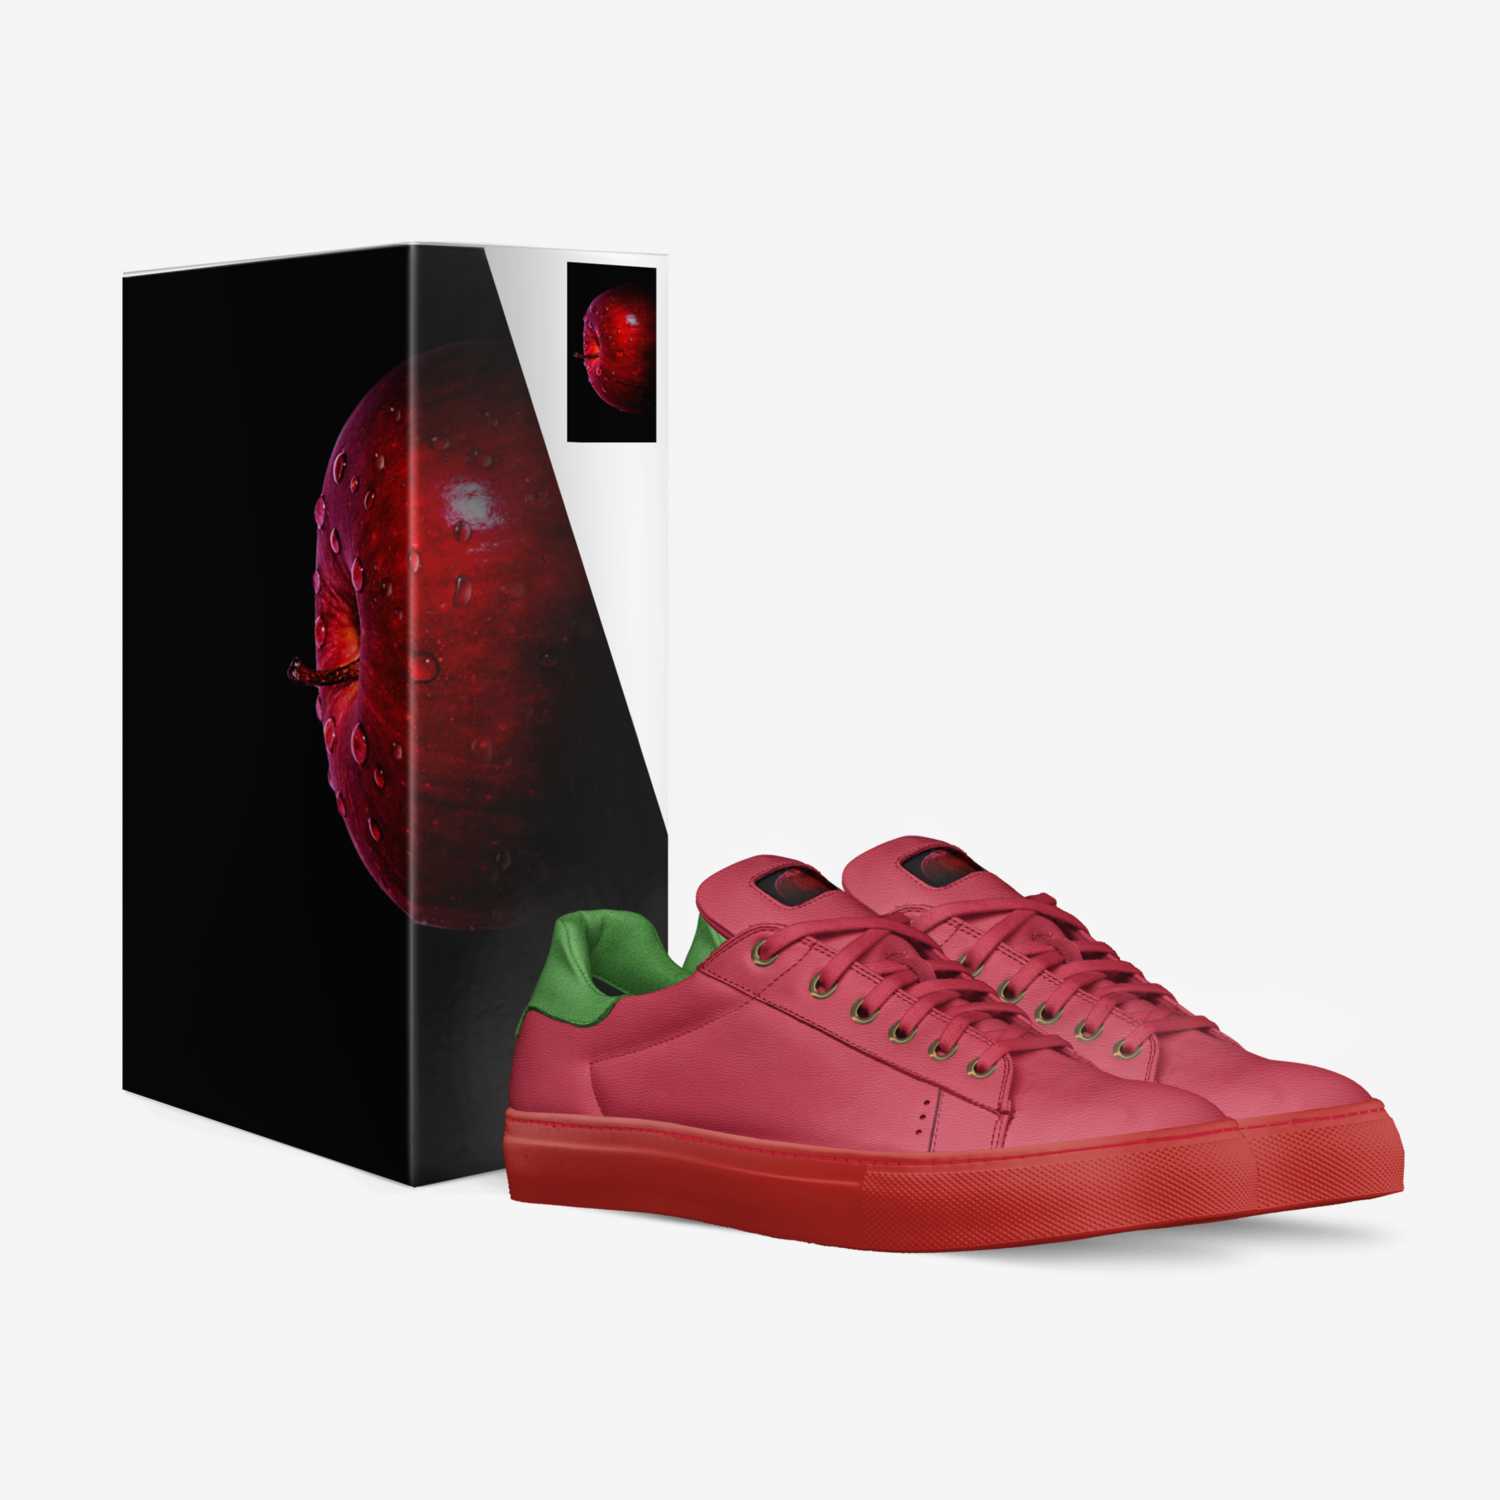 LA POMME REDS custom made in Italy shoes by Shakeem Jones | Box view